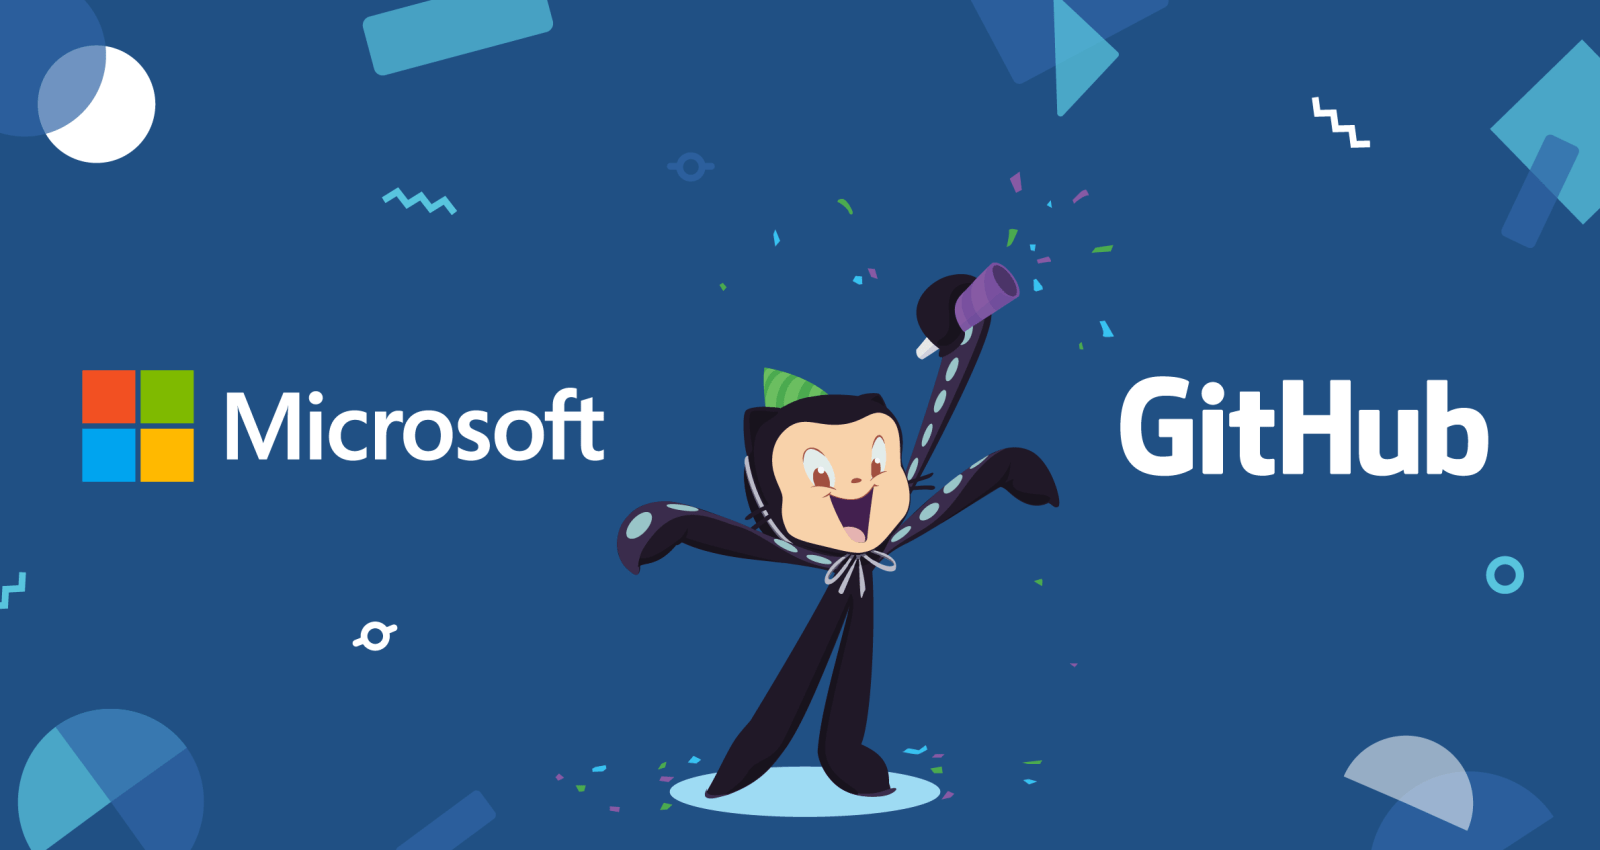 A bright future for GitHub